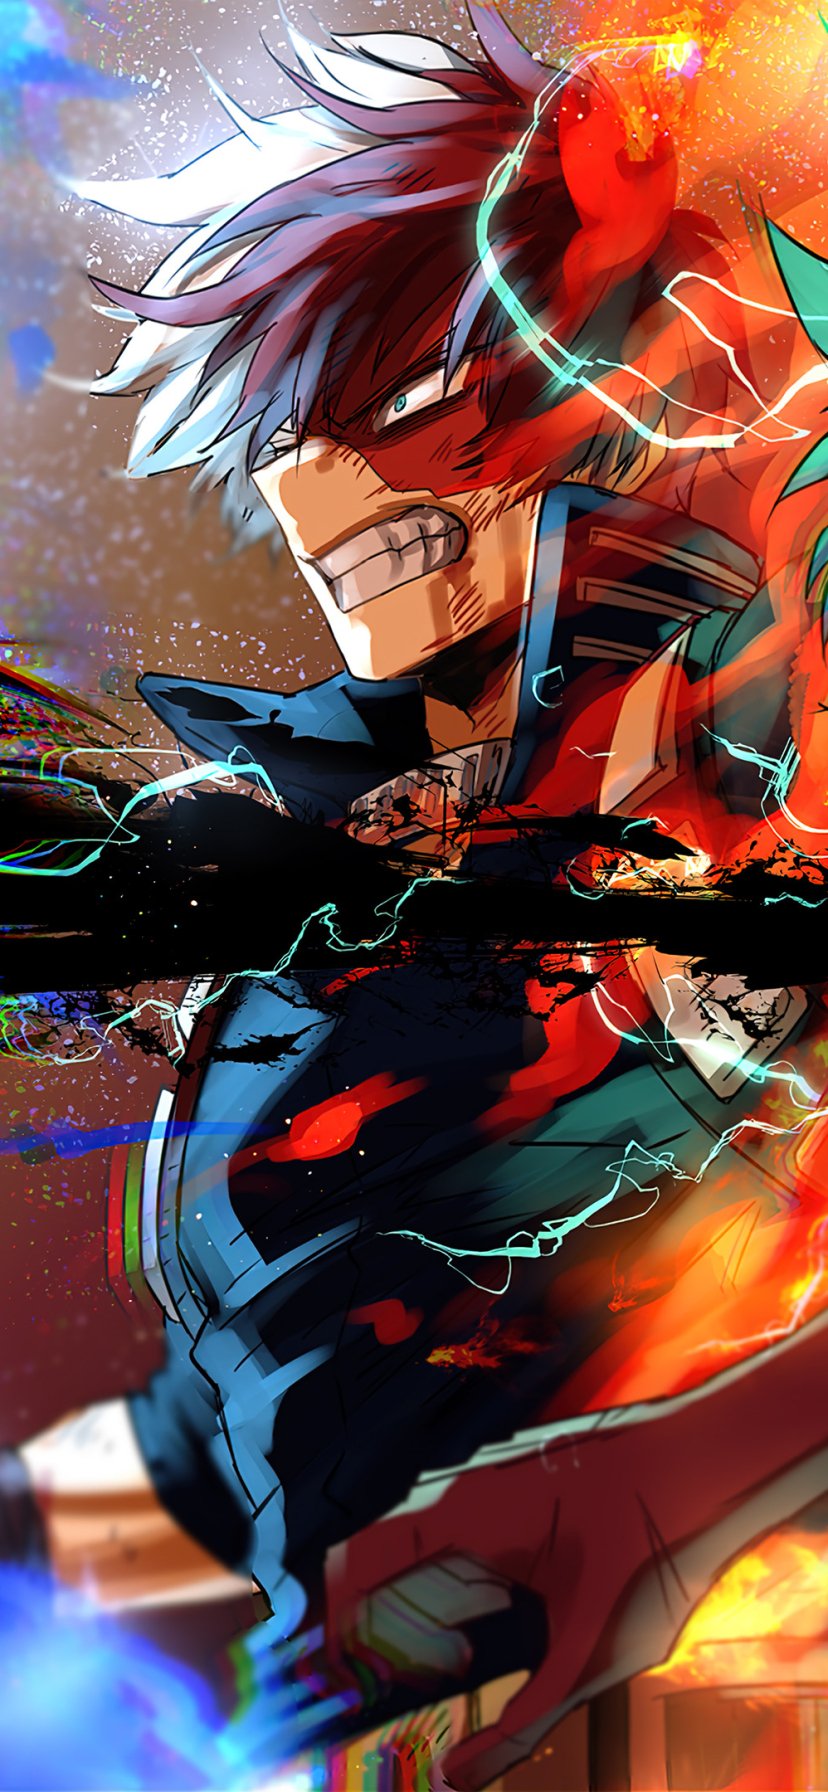 My Hero Academia what you need to know about the biggest superhero anime   The Verge